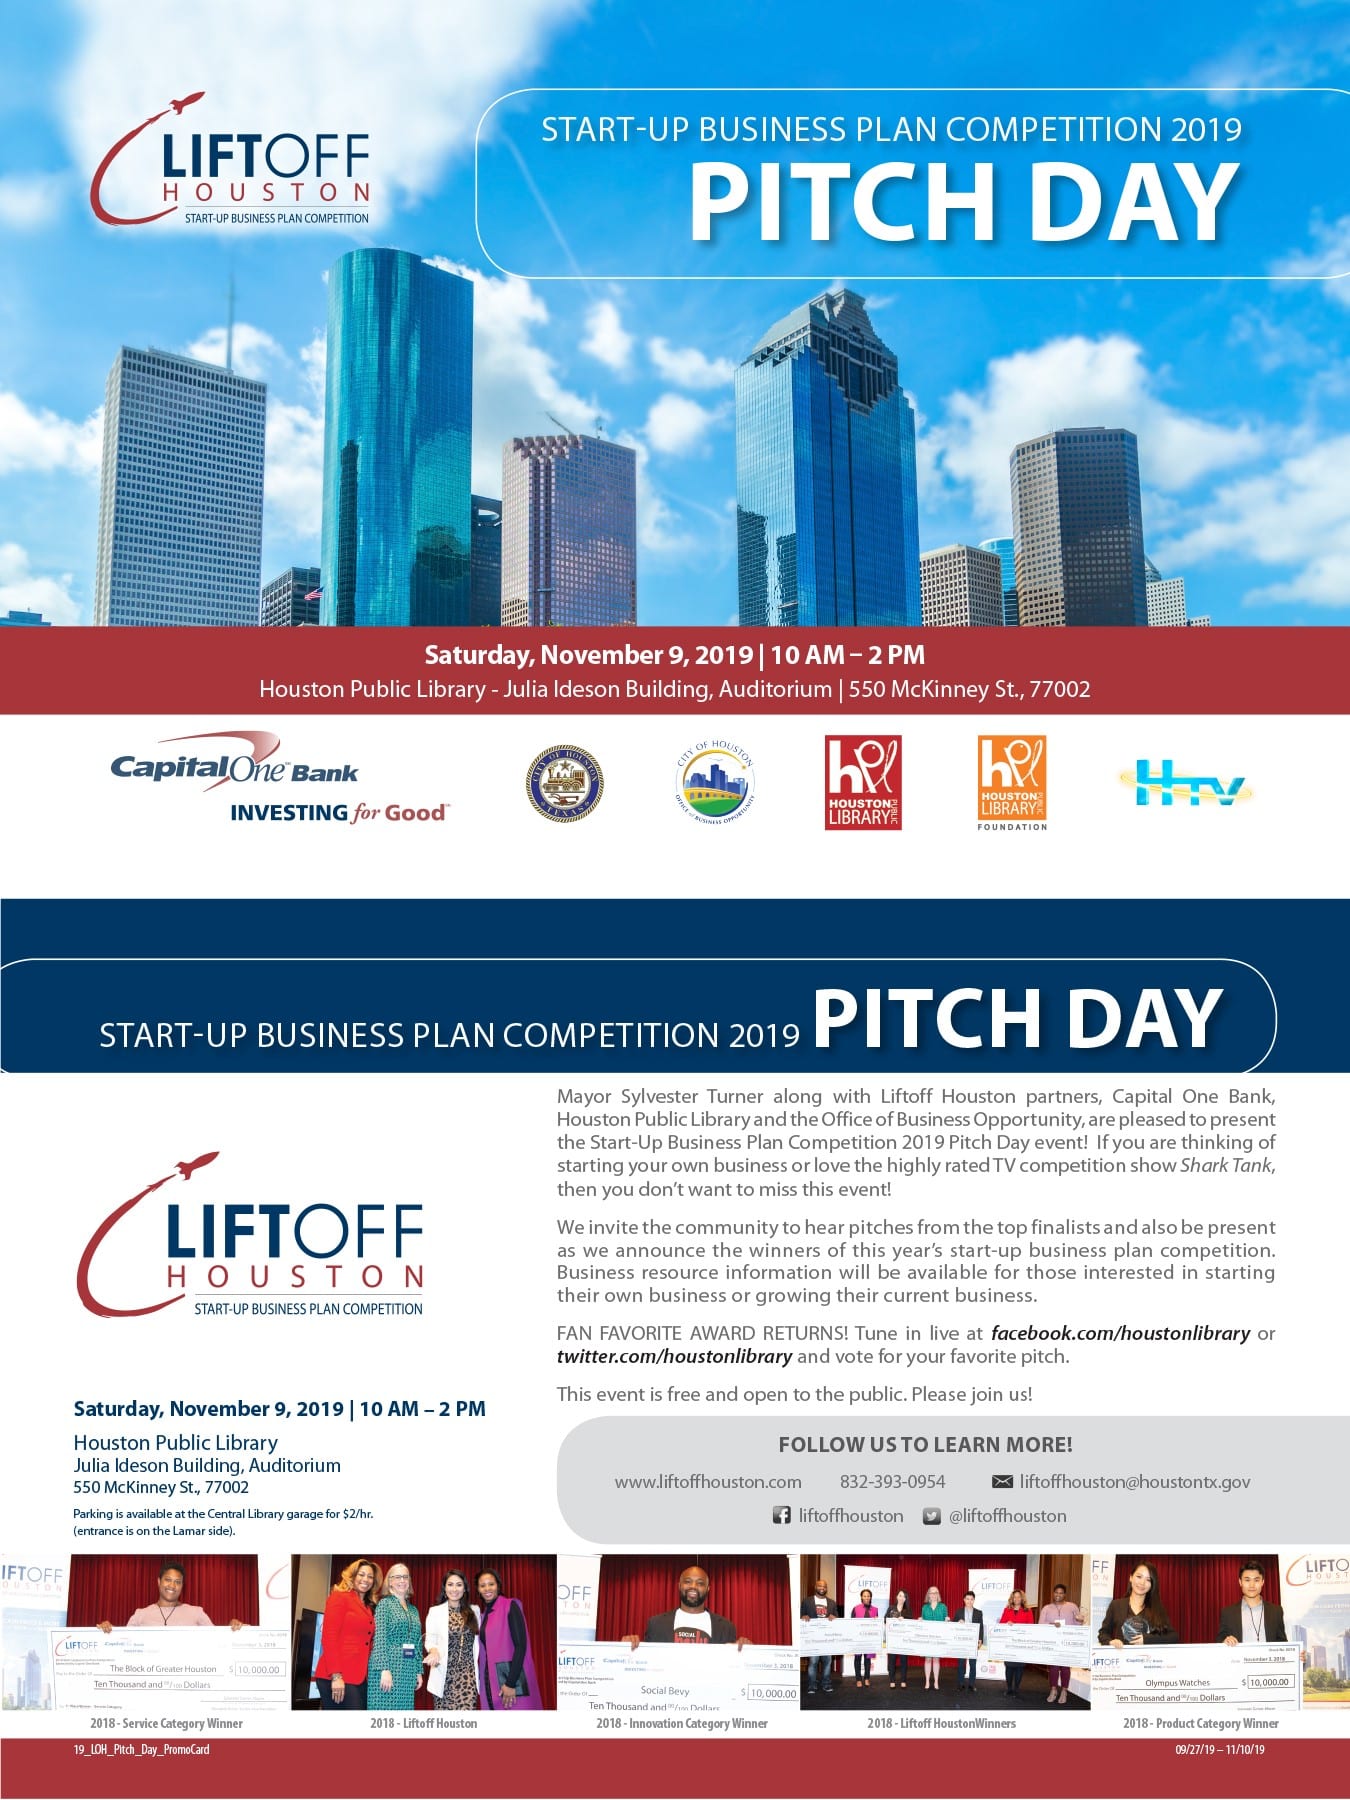 City of Houston Announces Liftoff Houston! Pitch Day 2019 Start-Up Business Plan Competition Finals | November 9, 2019